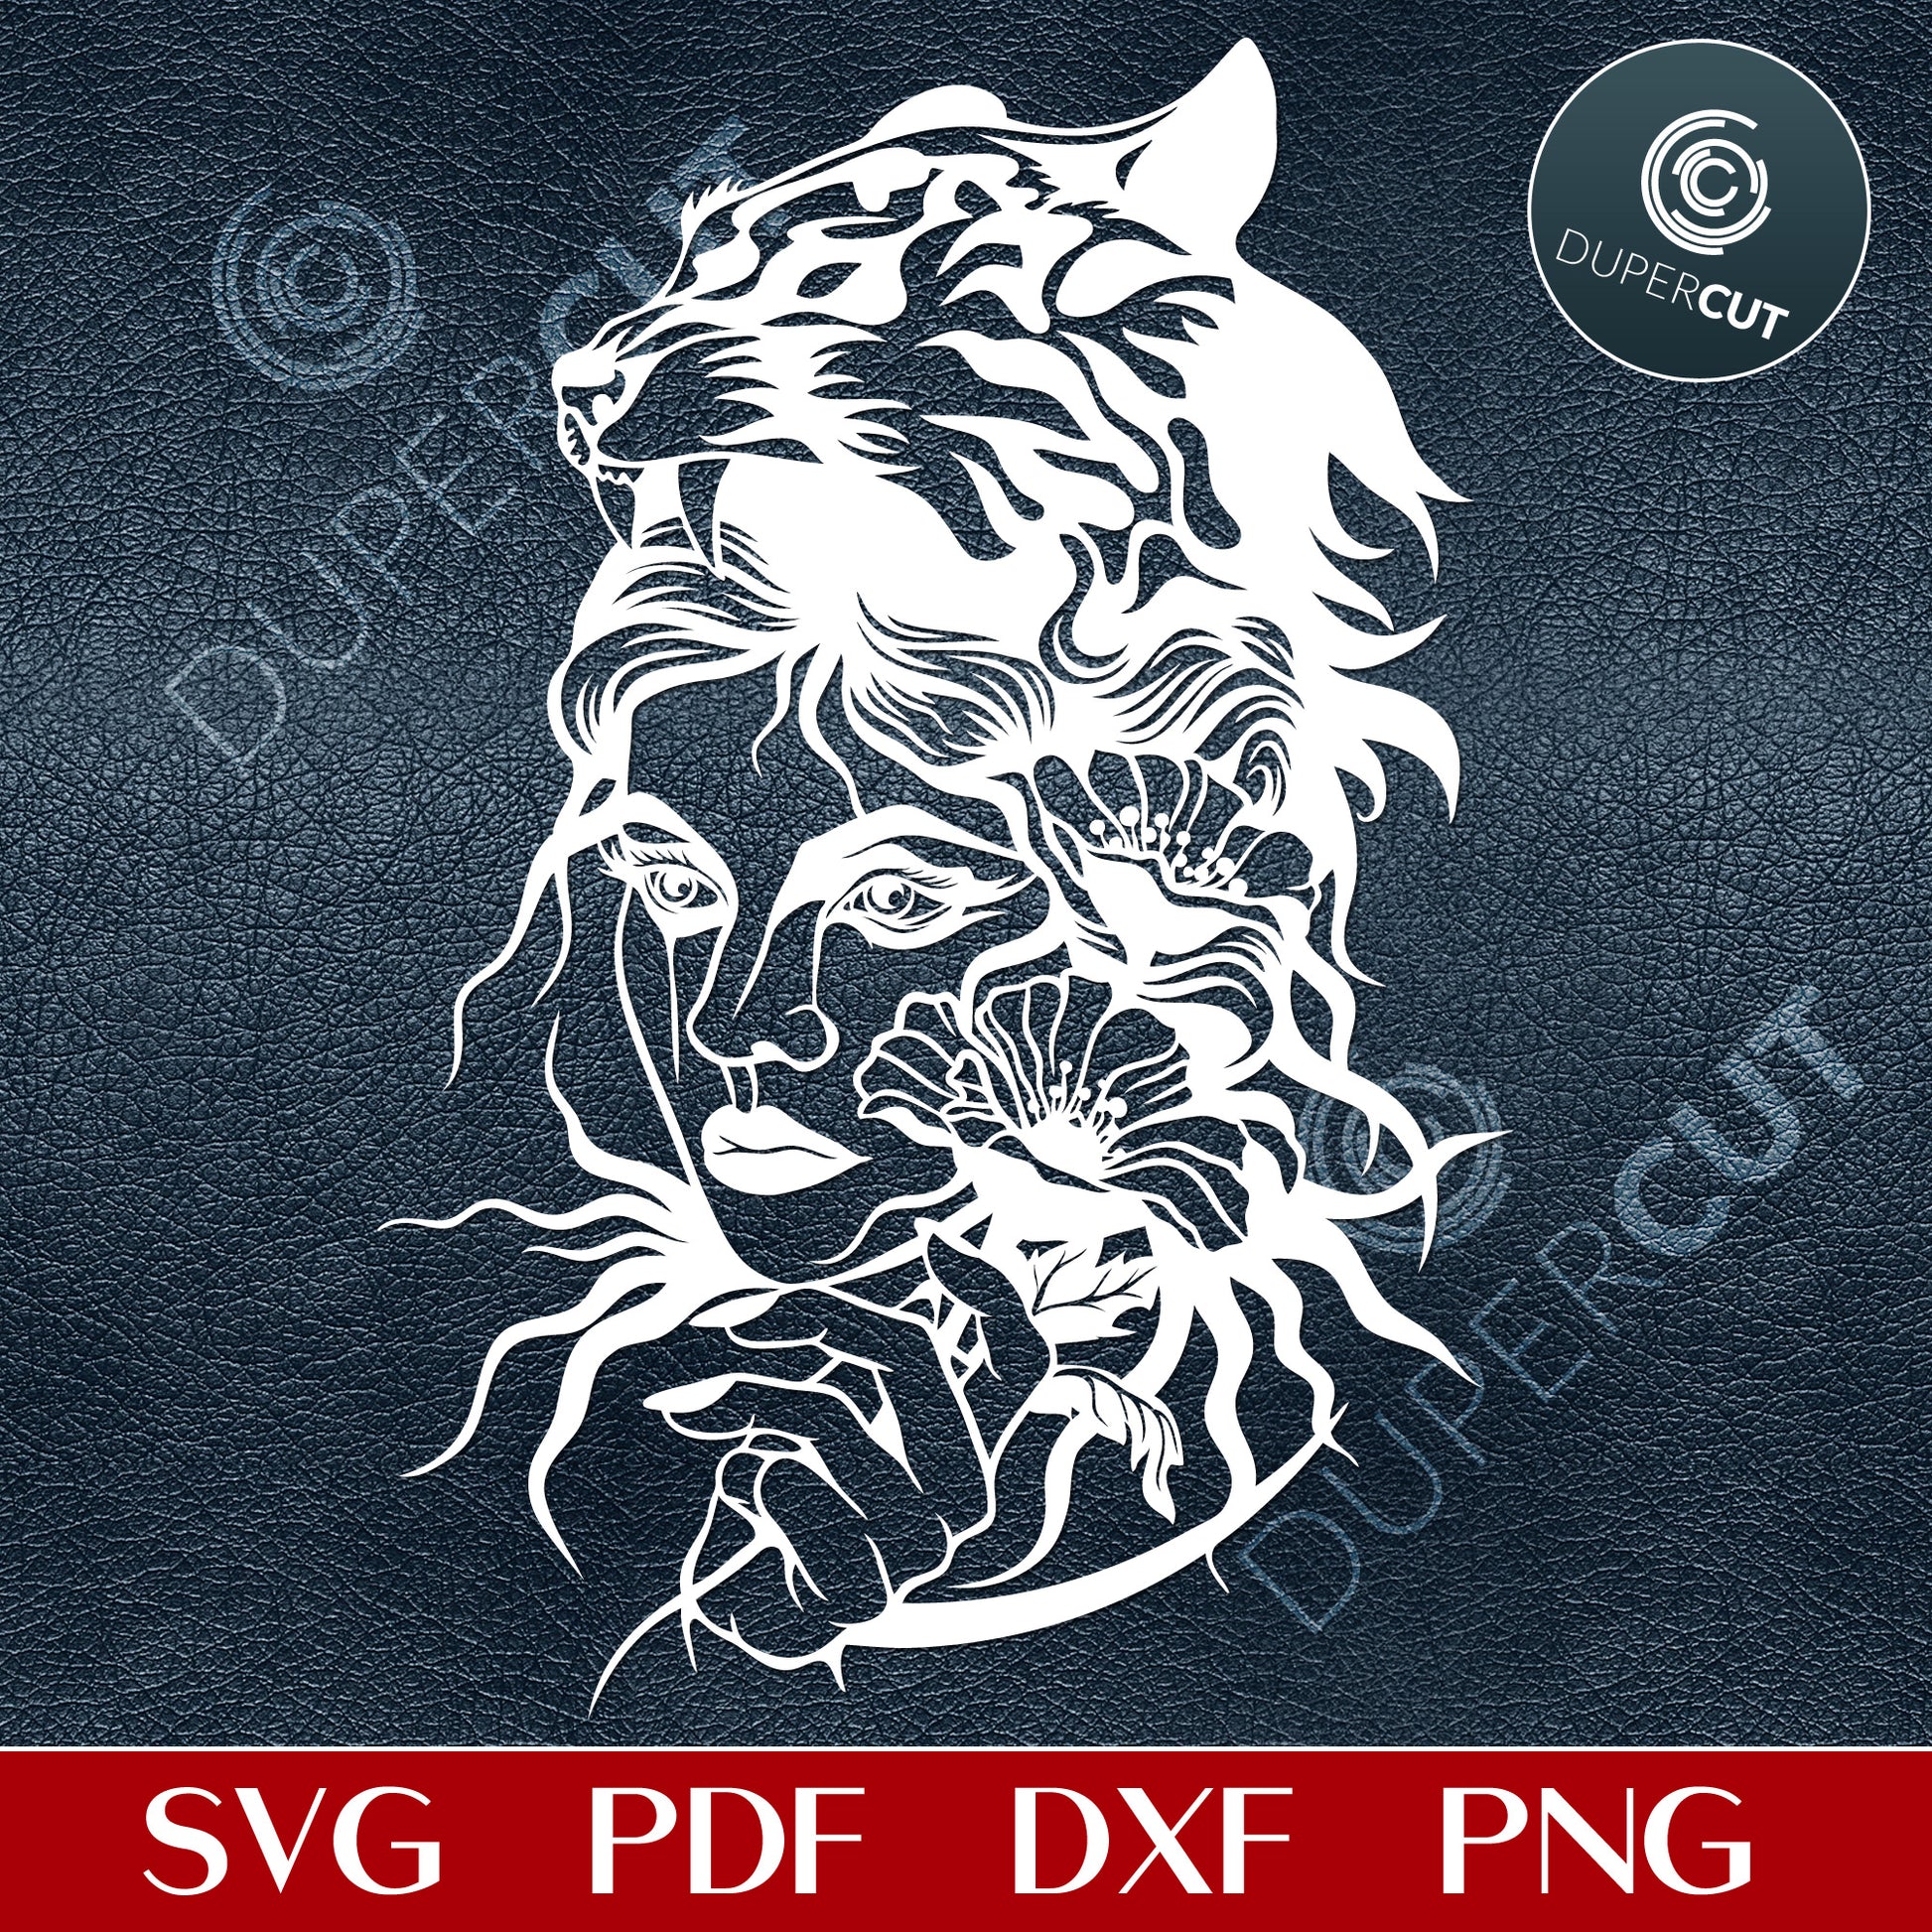 Girl with Tiger headdress and flowers, vector line drawing. Laser cutting template SVG PNG DXF files. For DIY projects Cricut, Glowforge, Silhouette Cameo, CNC Machines.